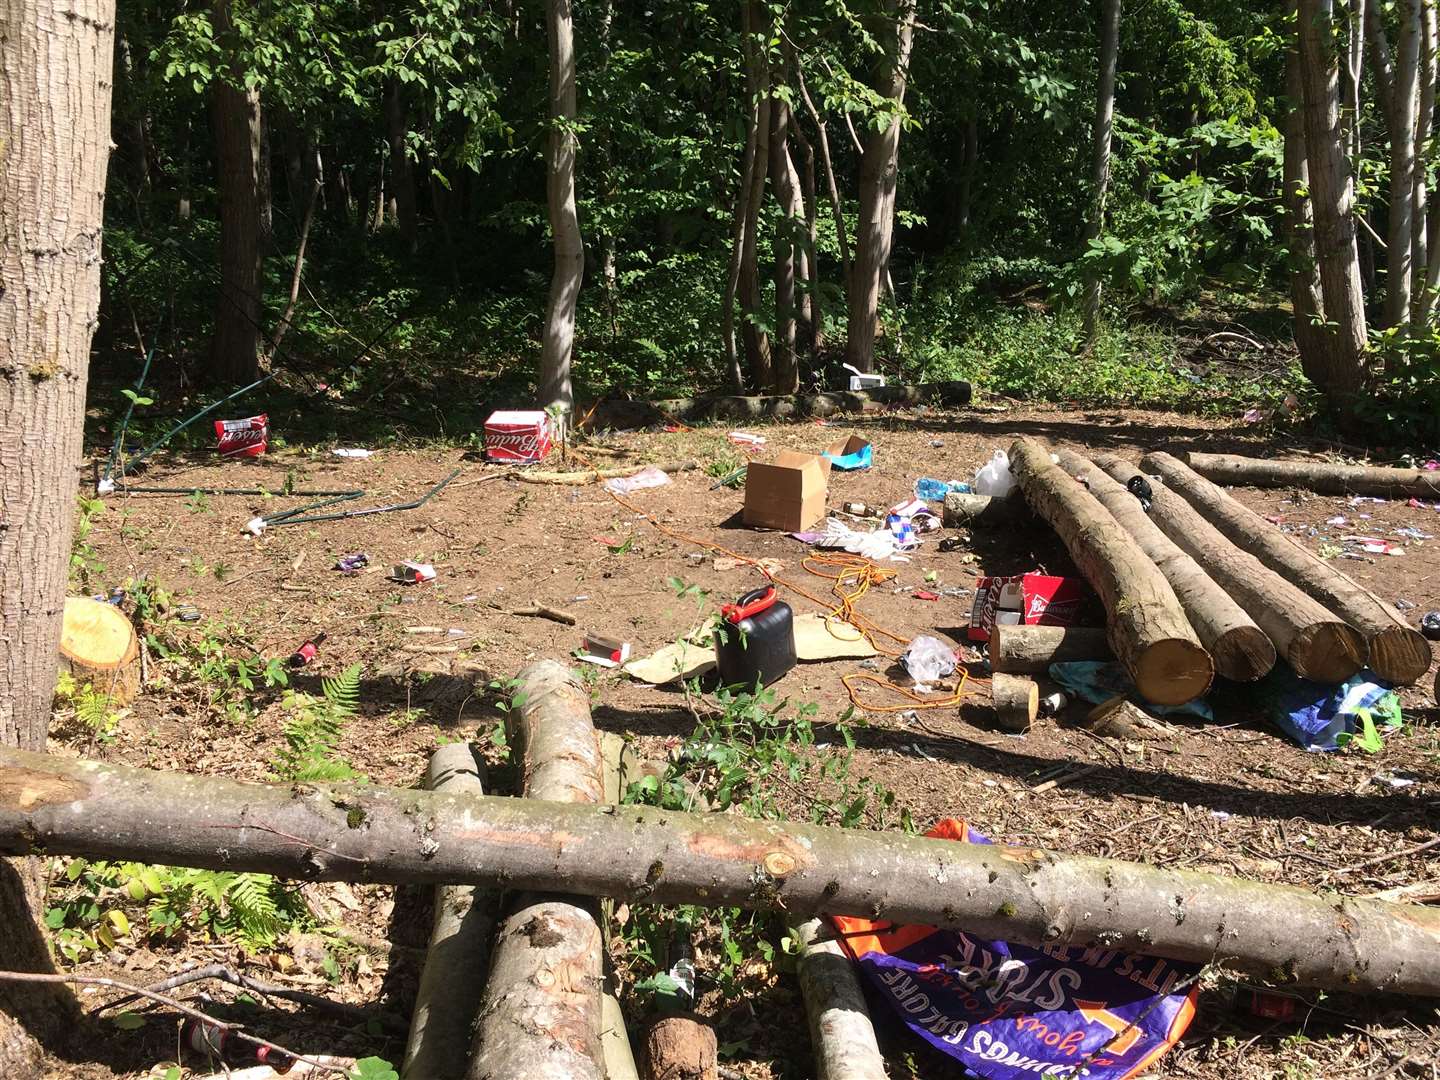 Litter strewn over rave site in the Vigo Village woodland, near Gravesend, angered residents after a rave